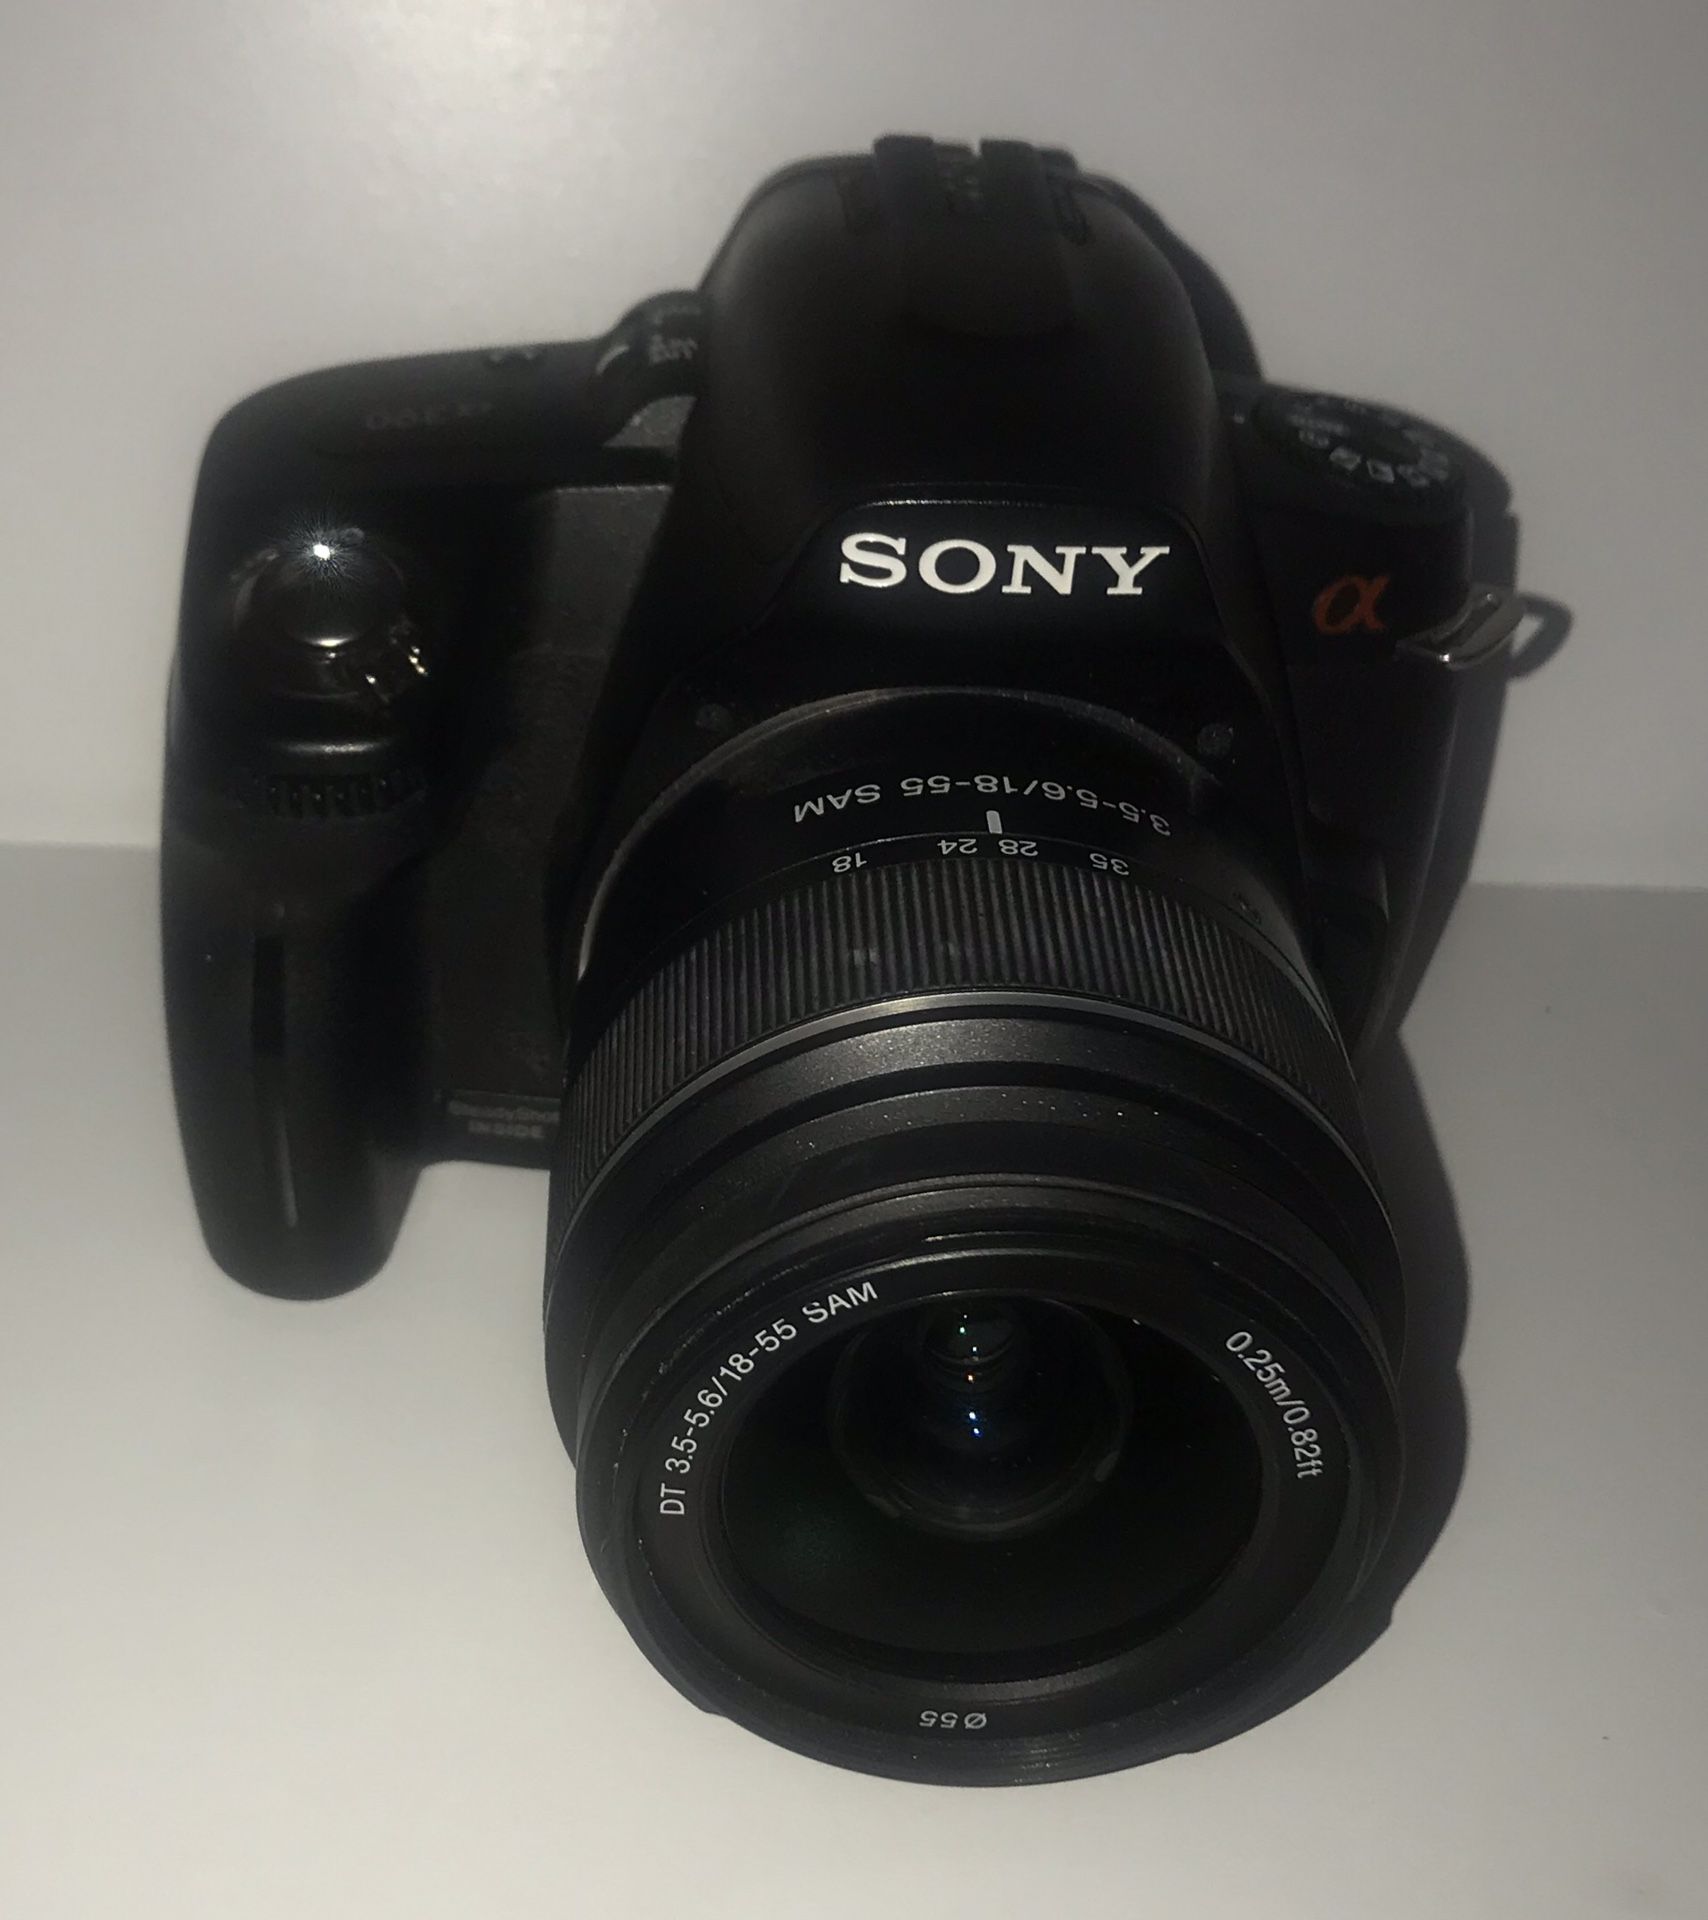 Sony Alpha A390 14.2MP Digital SLR Camera with Sony 18-55mm F3.5-5.6 Lens. Condition is Used.